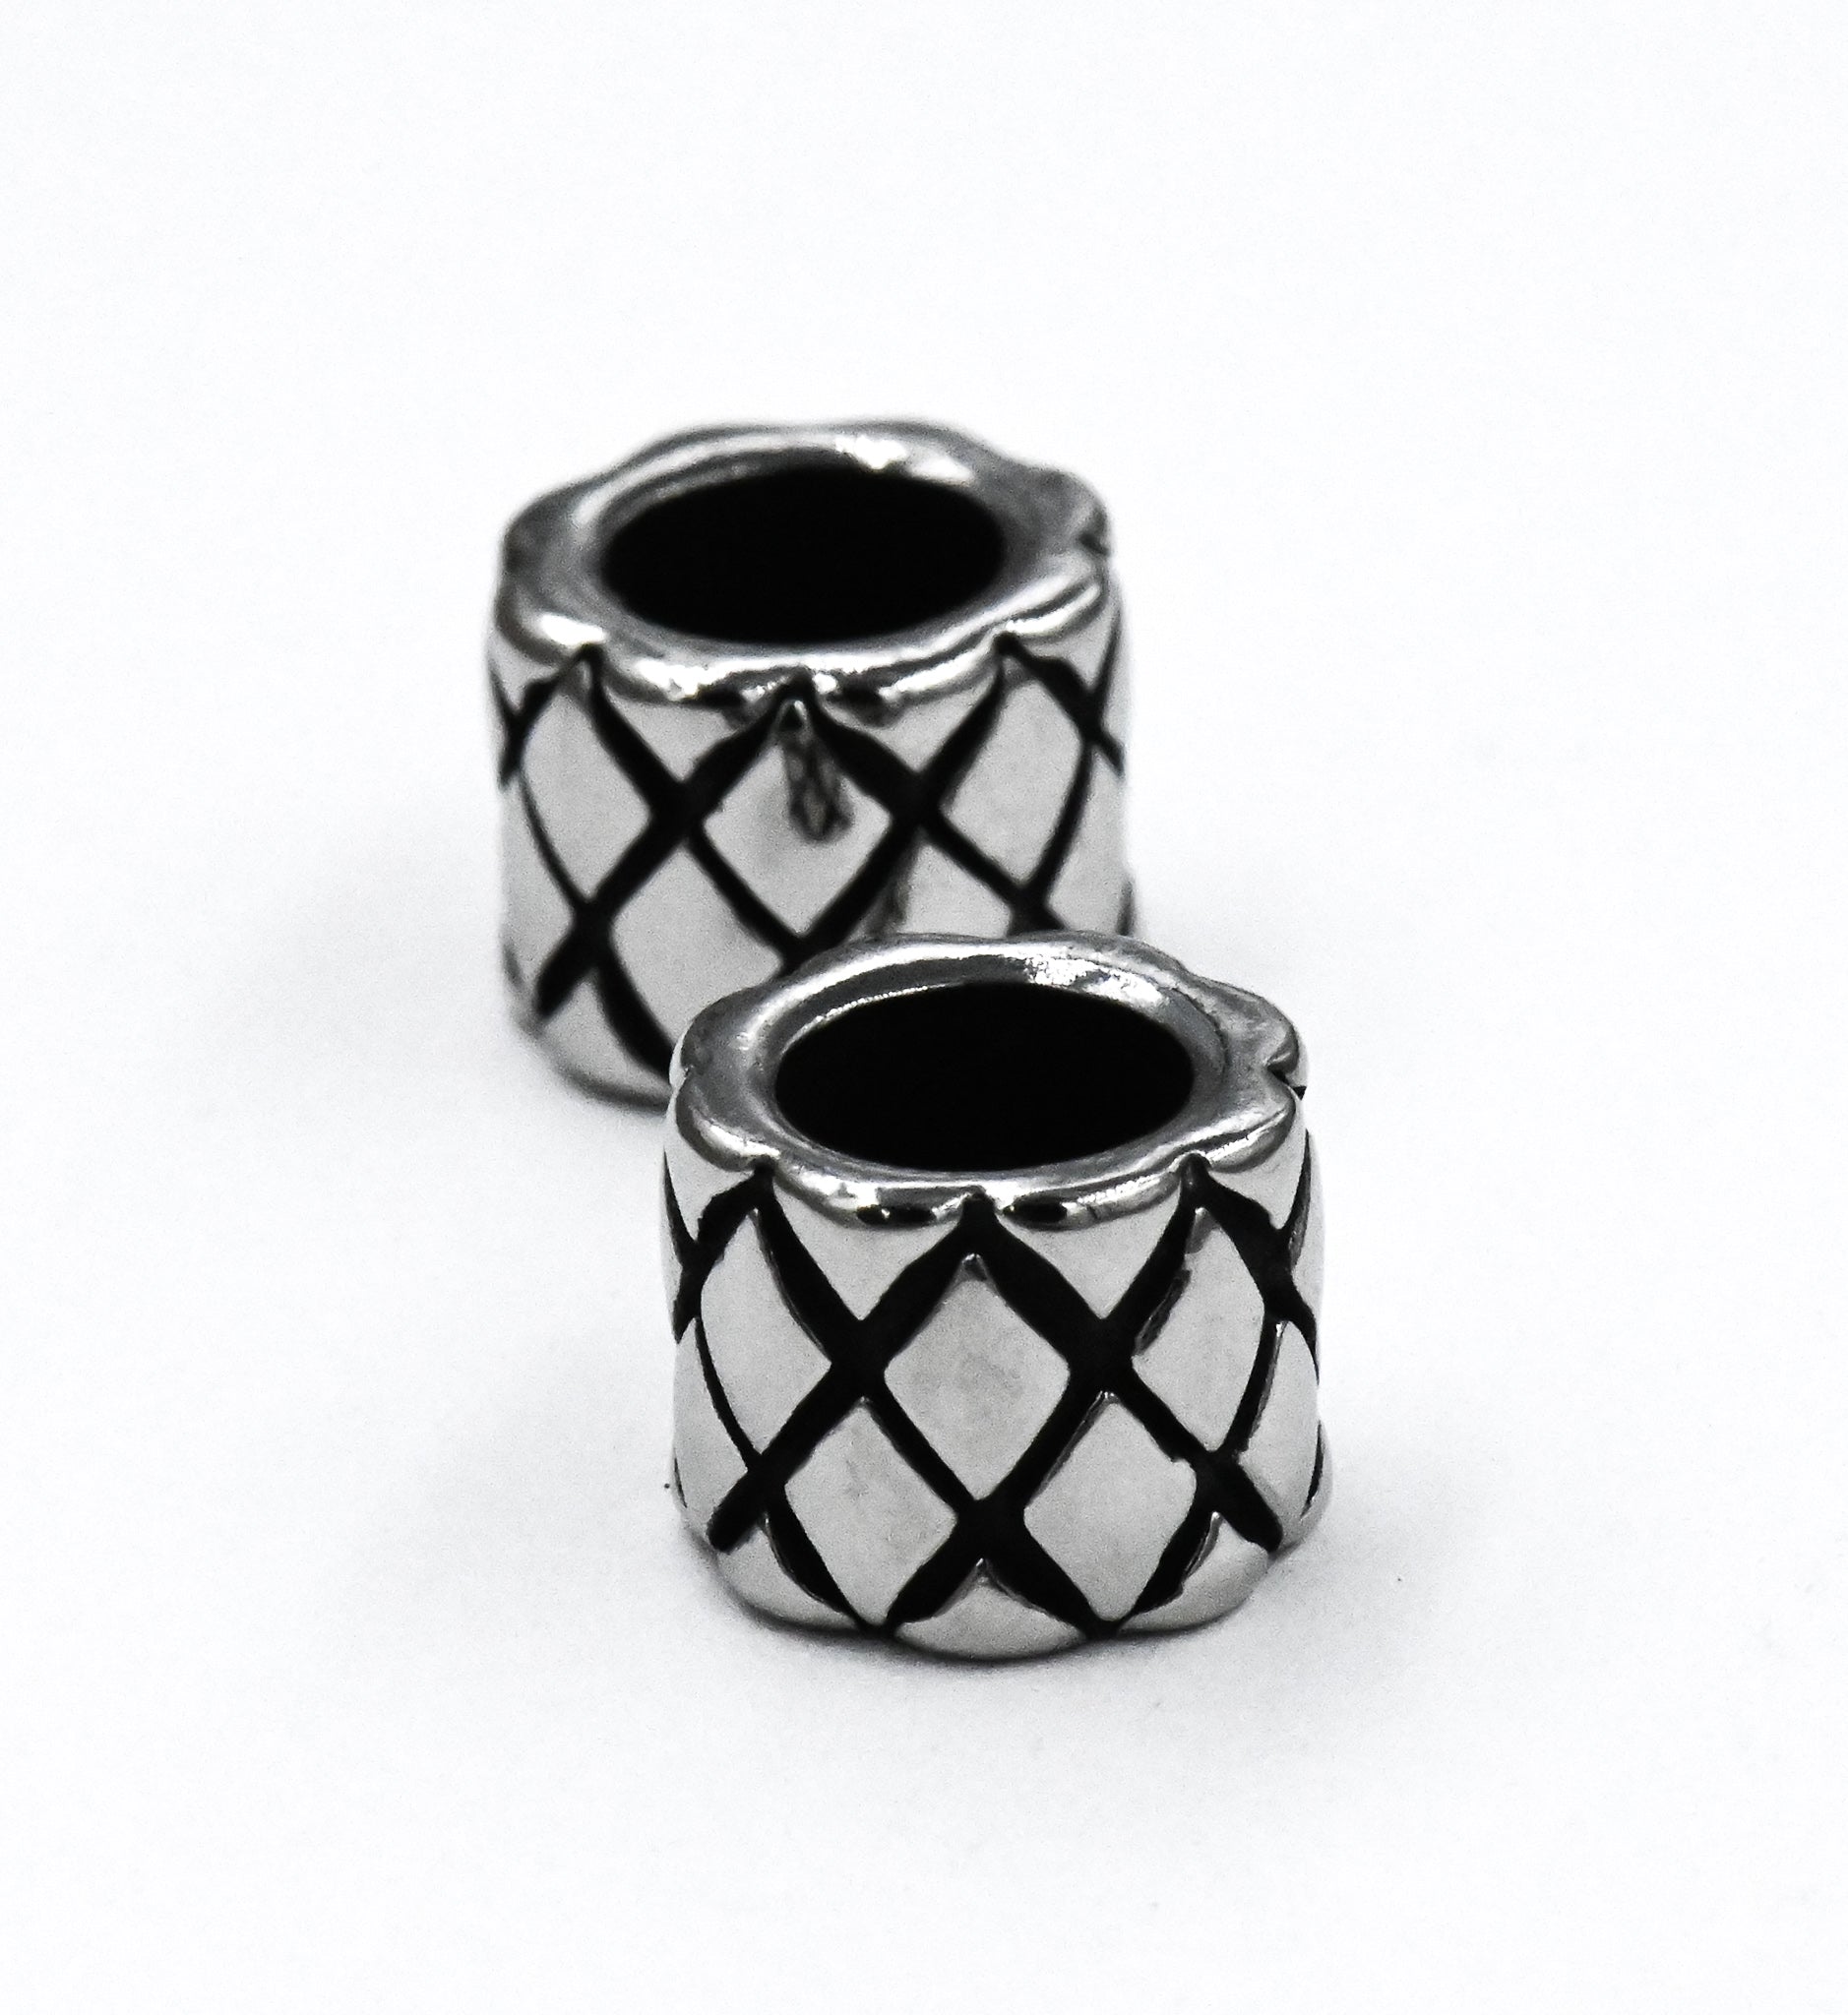 Stainless Steel Beads, Large Hole Beads, Column with Braided Pattern, Antique Silver, 9mm